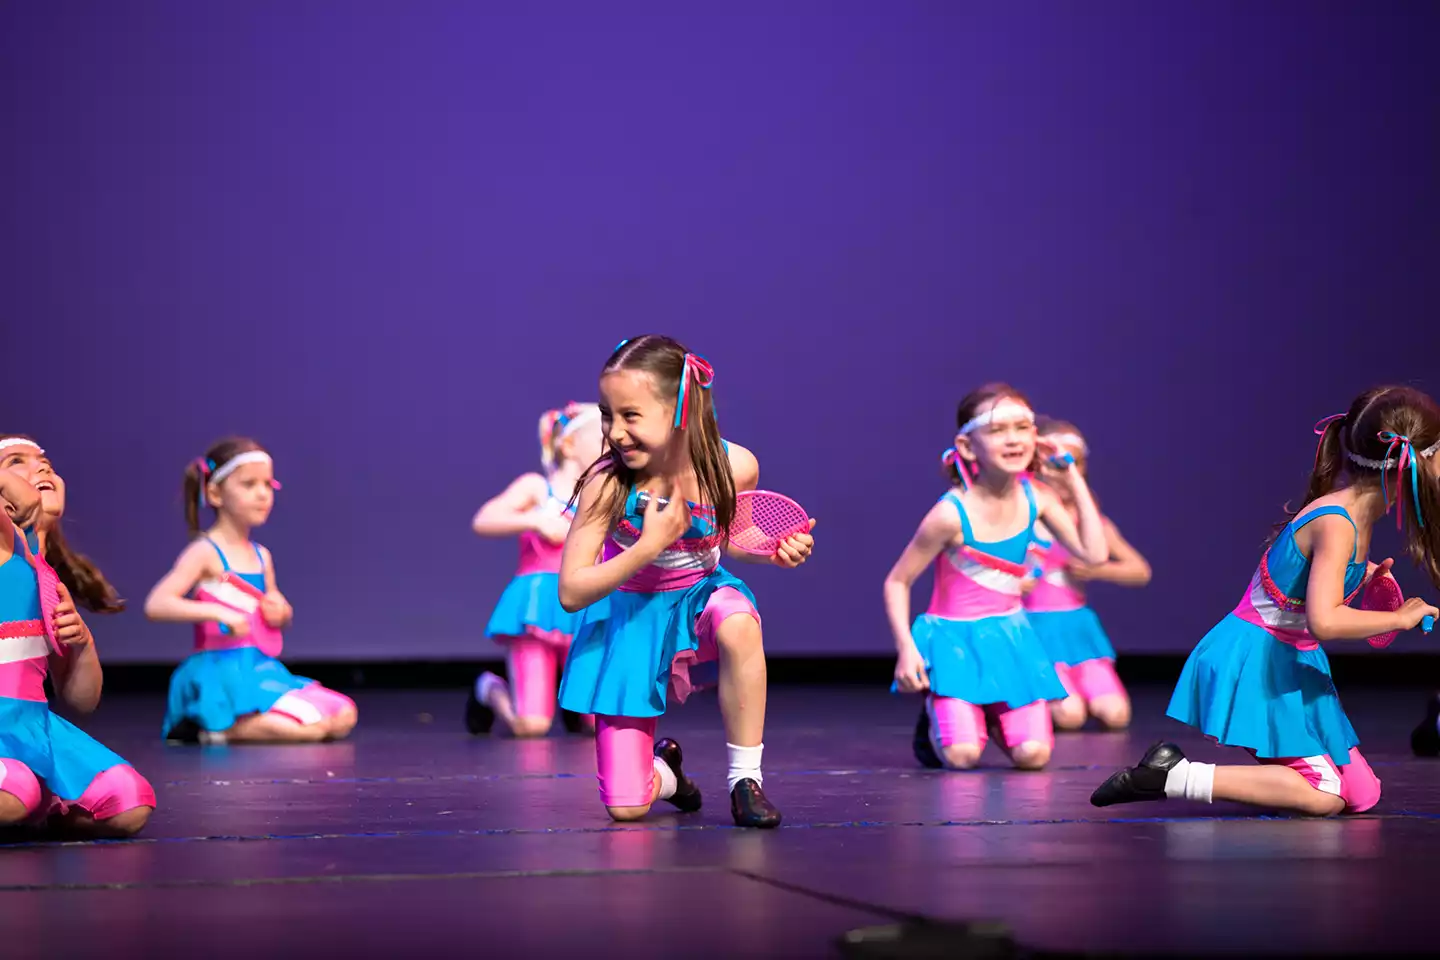 These K/1 jazz dancers hit the recital stage dancing to 